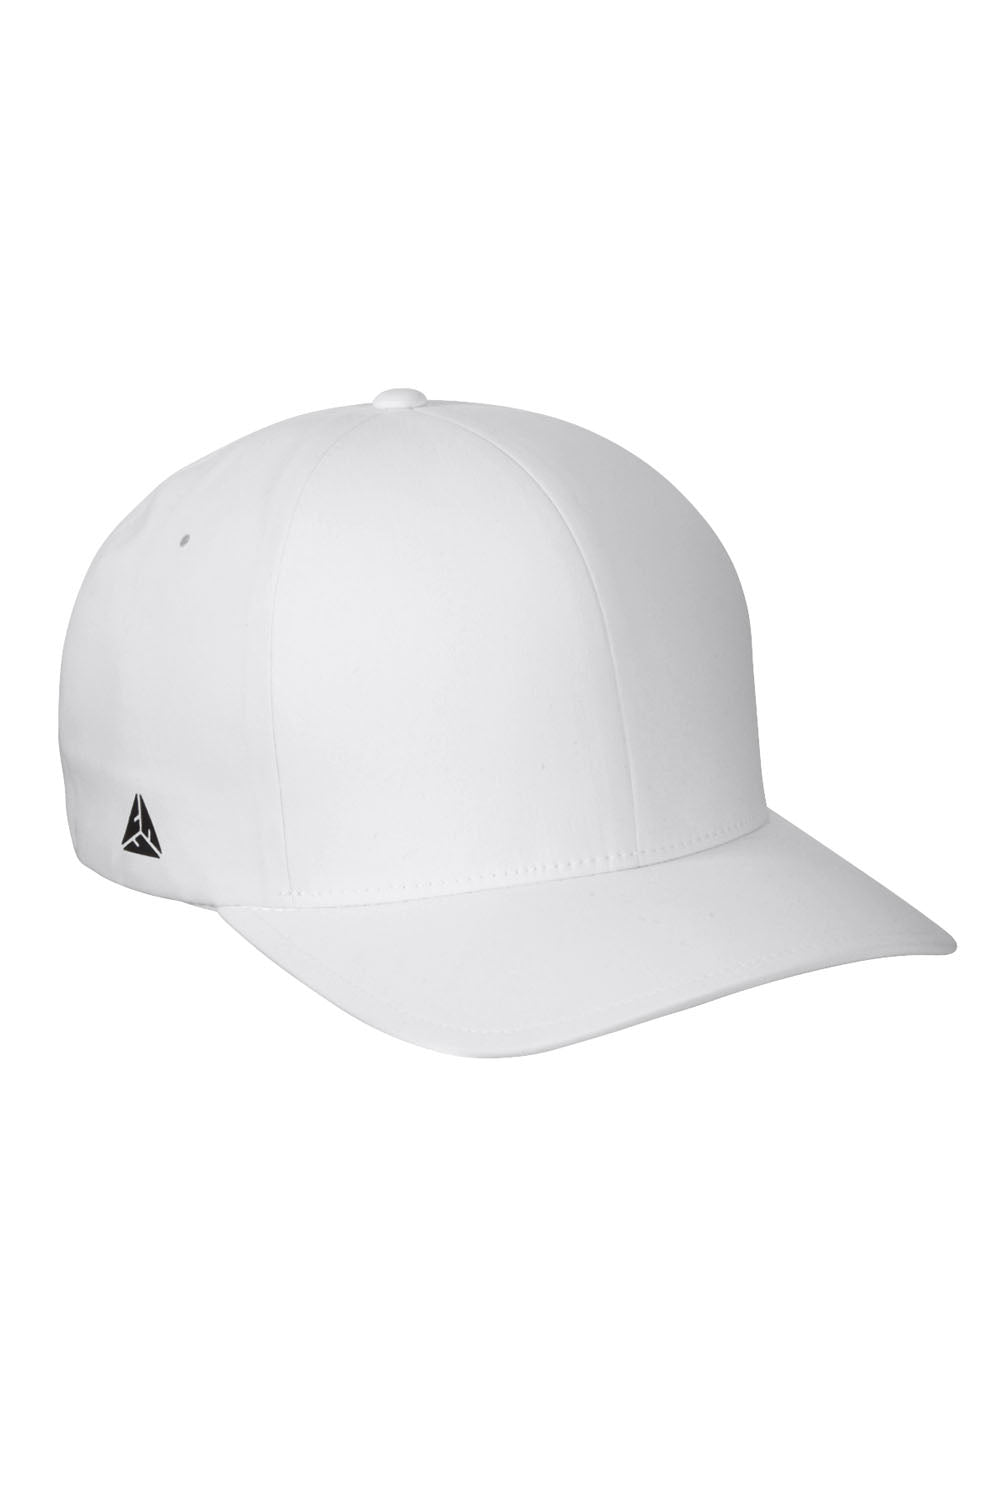 Flexfit YP180 Mens Moisture Wicking Stretch Fit Hat White Front